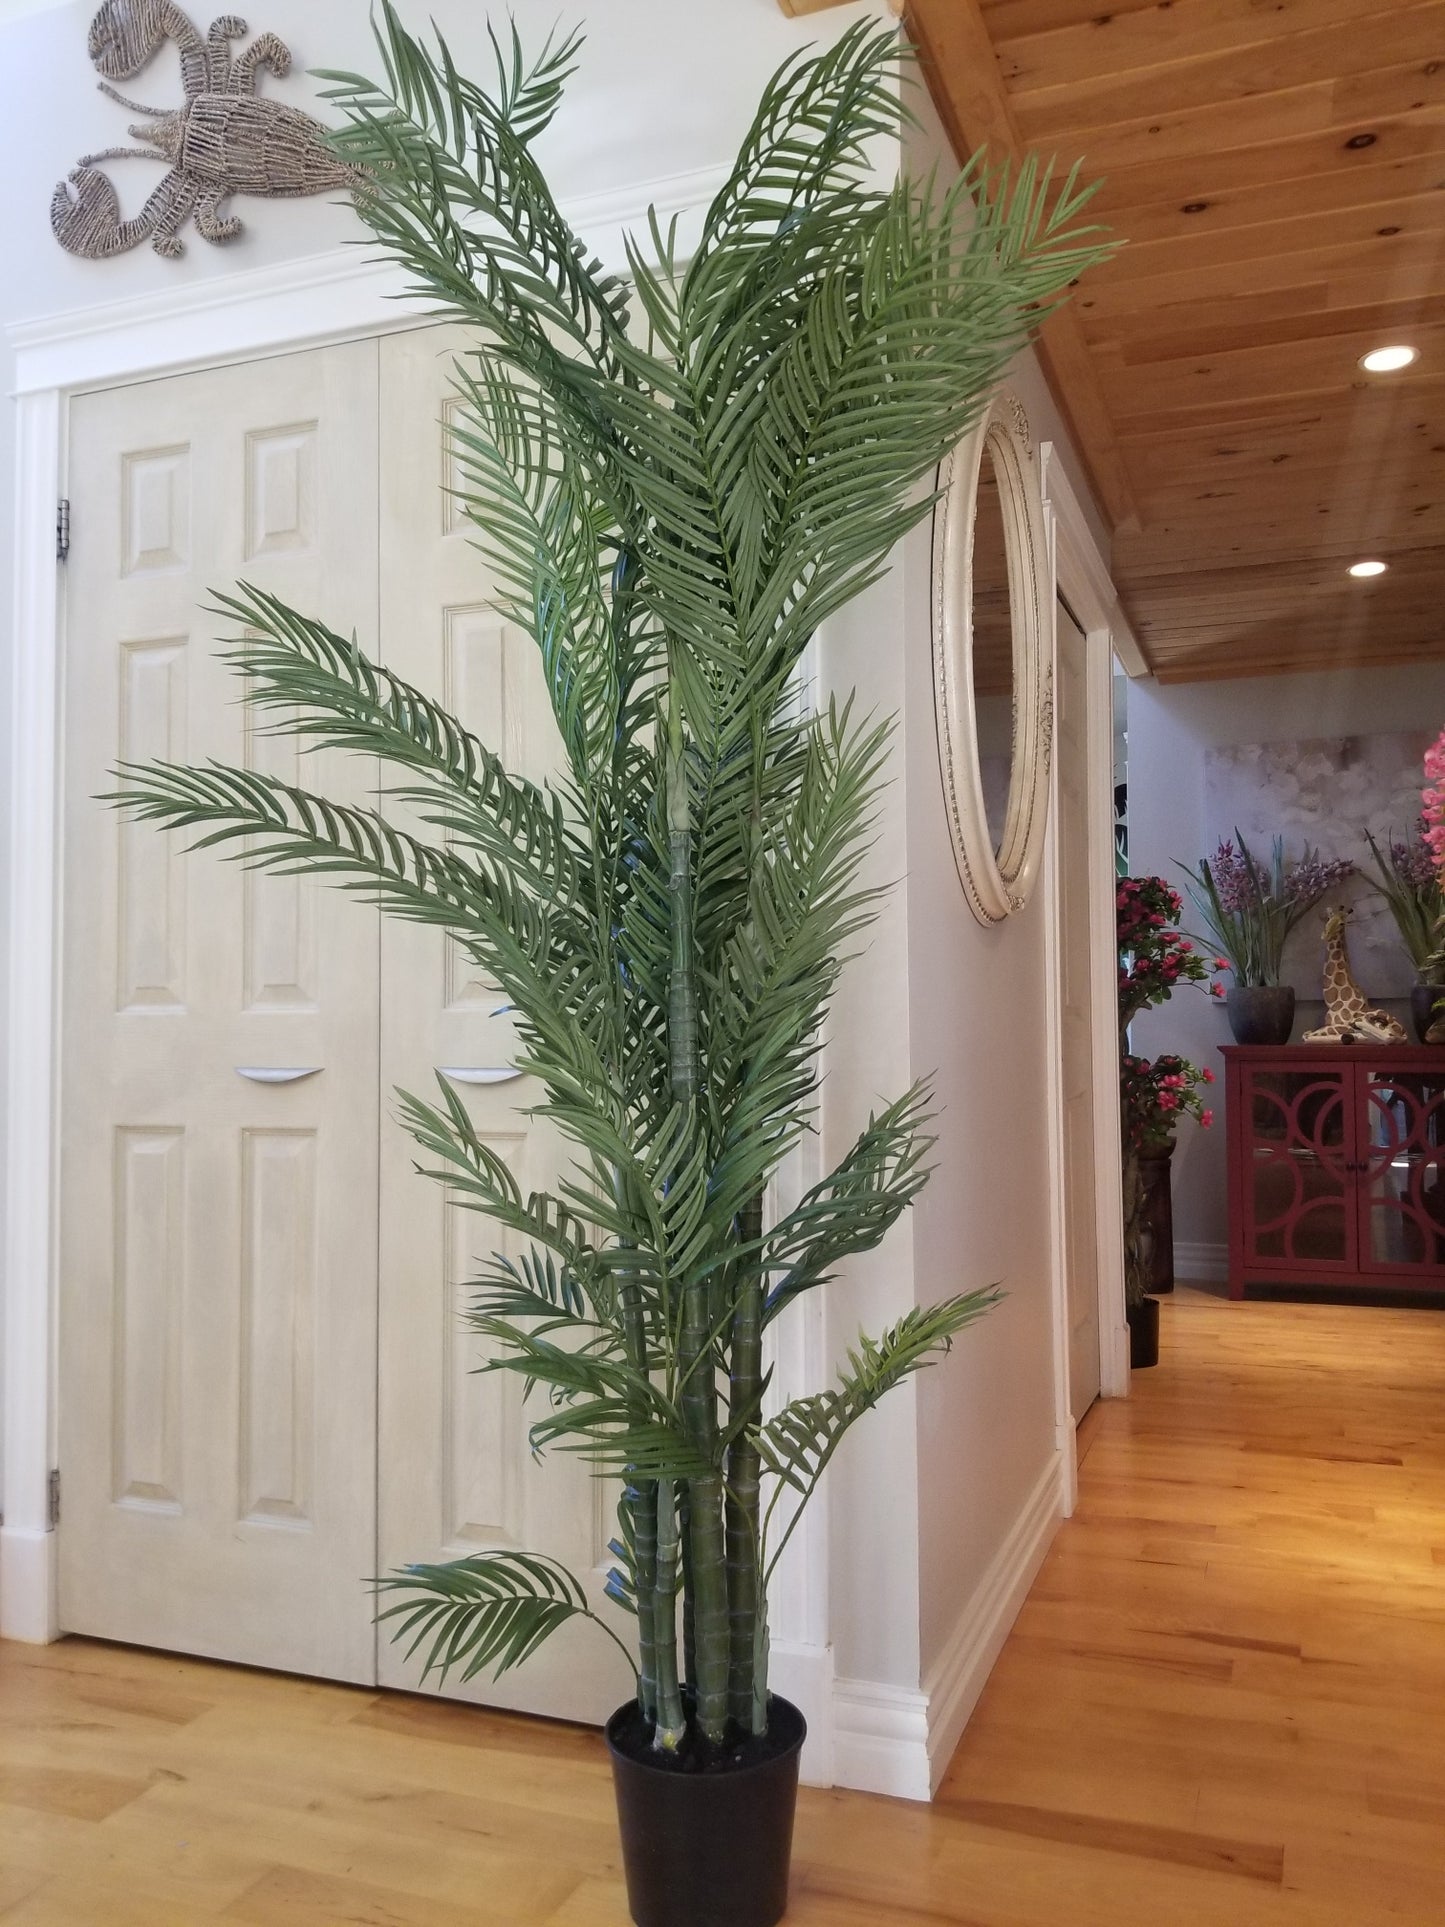 6 foot areca palm tree for sale